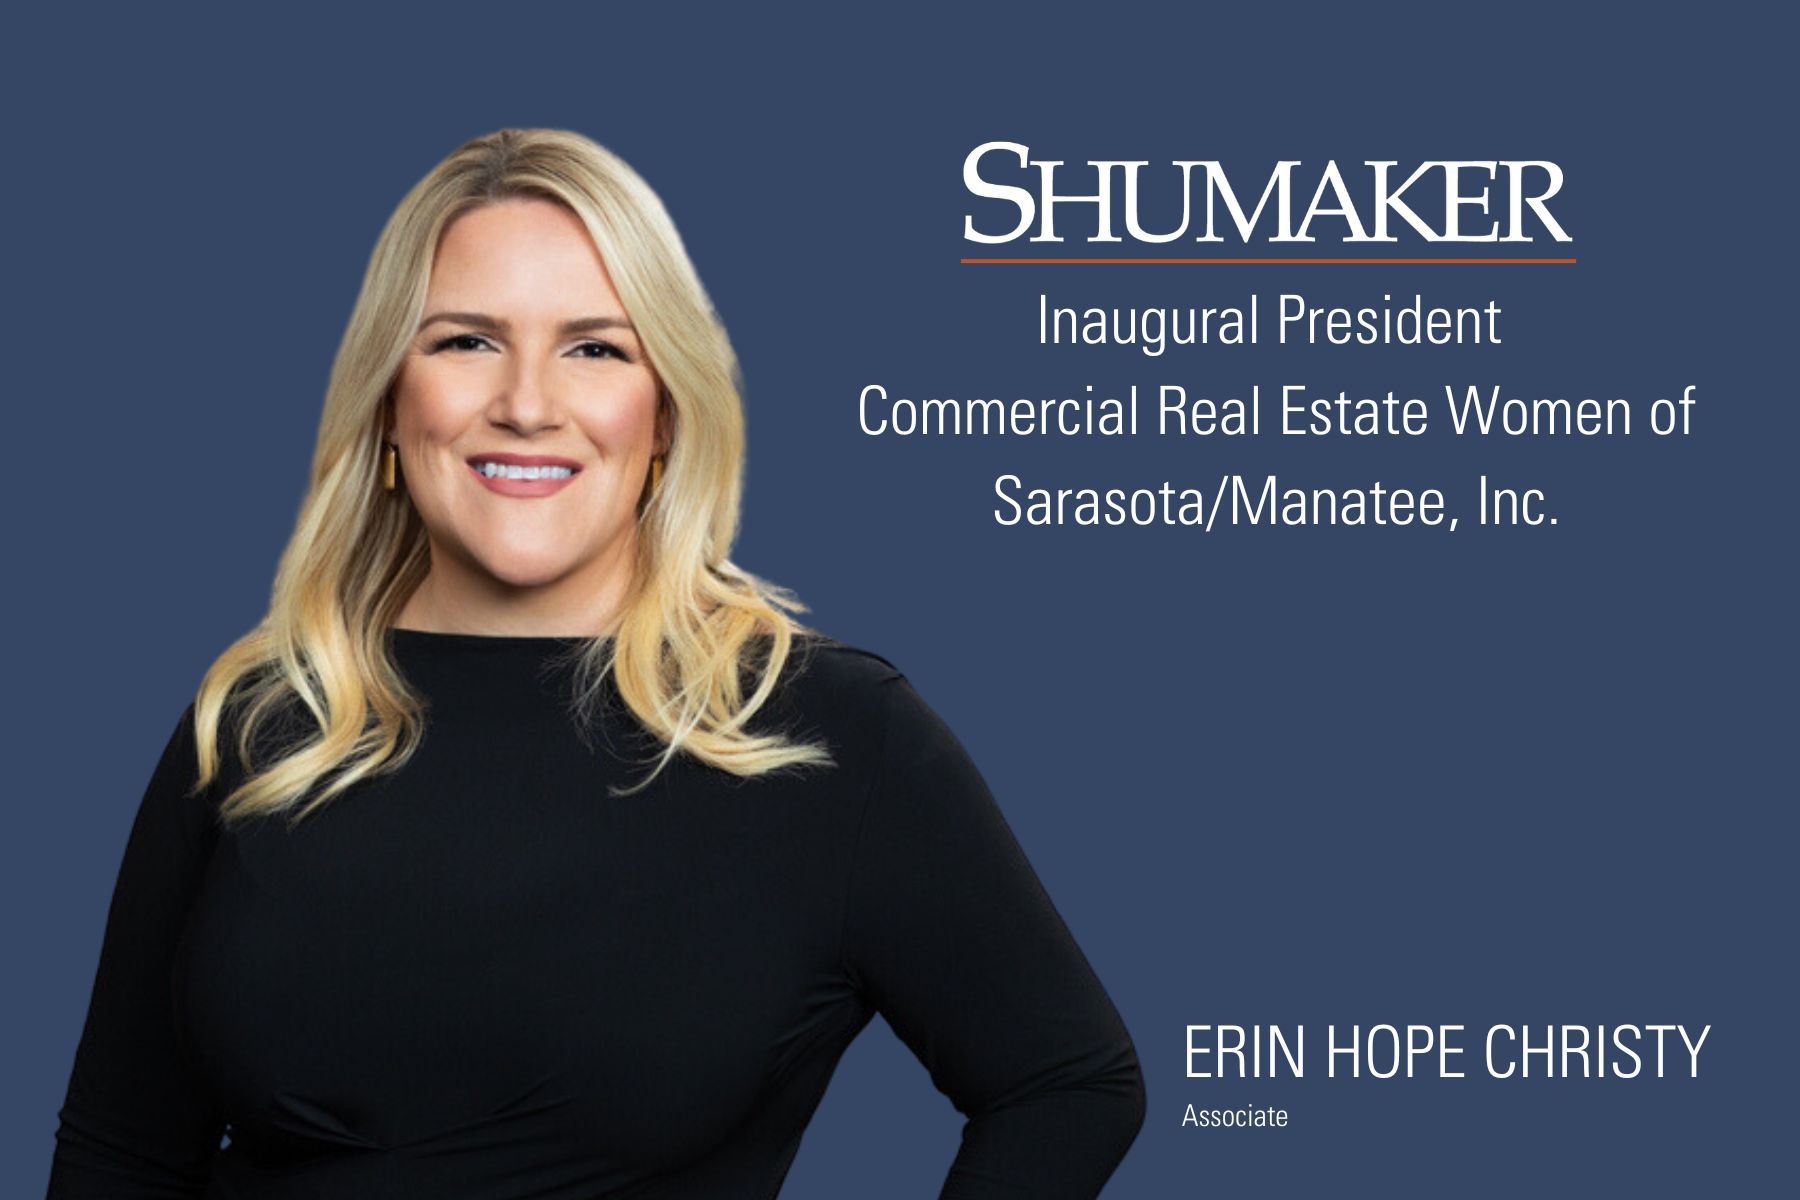 Erin Hope Christy Appointed as Inaugural President for Commercial Real Estate Women of Sarasota/Manatee, Inc.